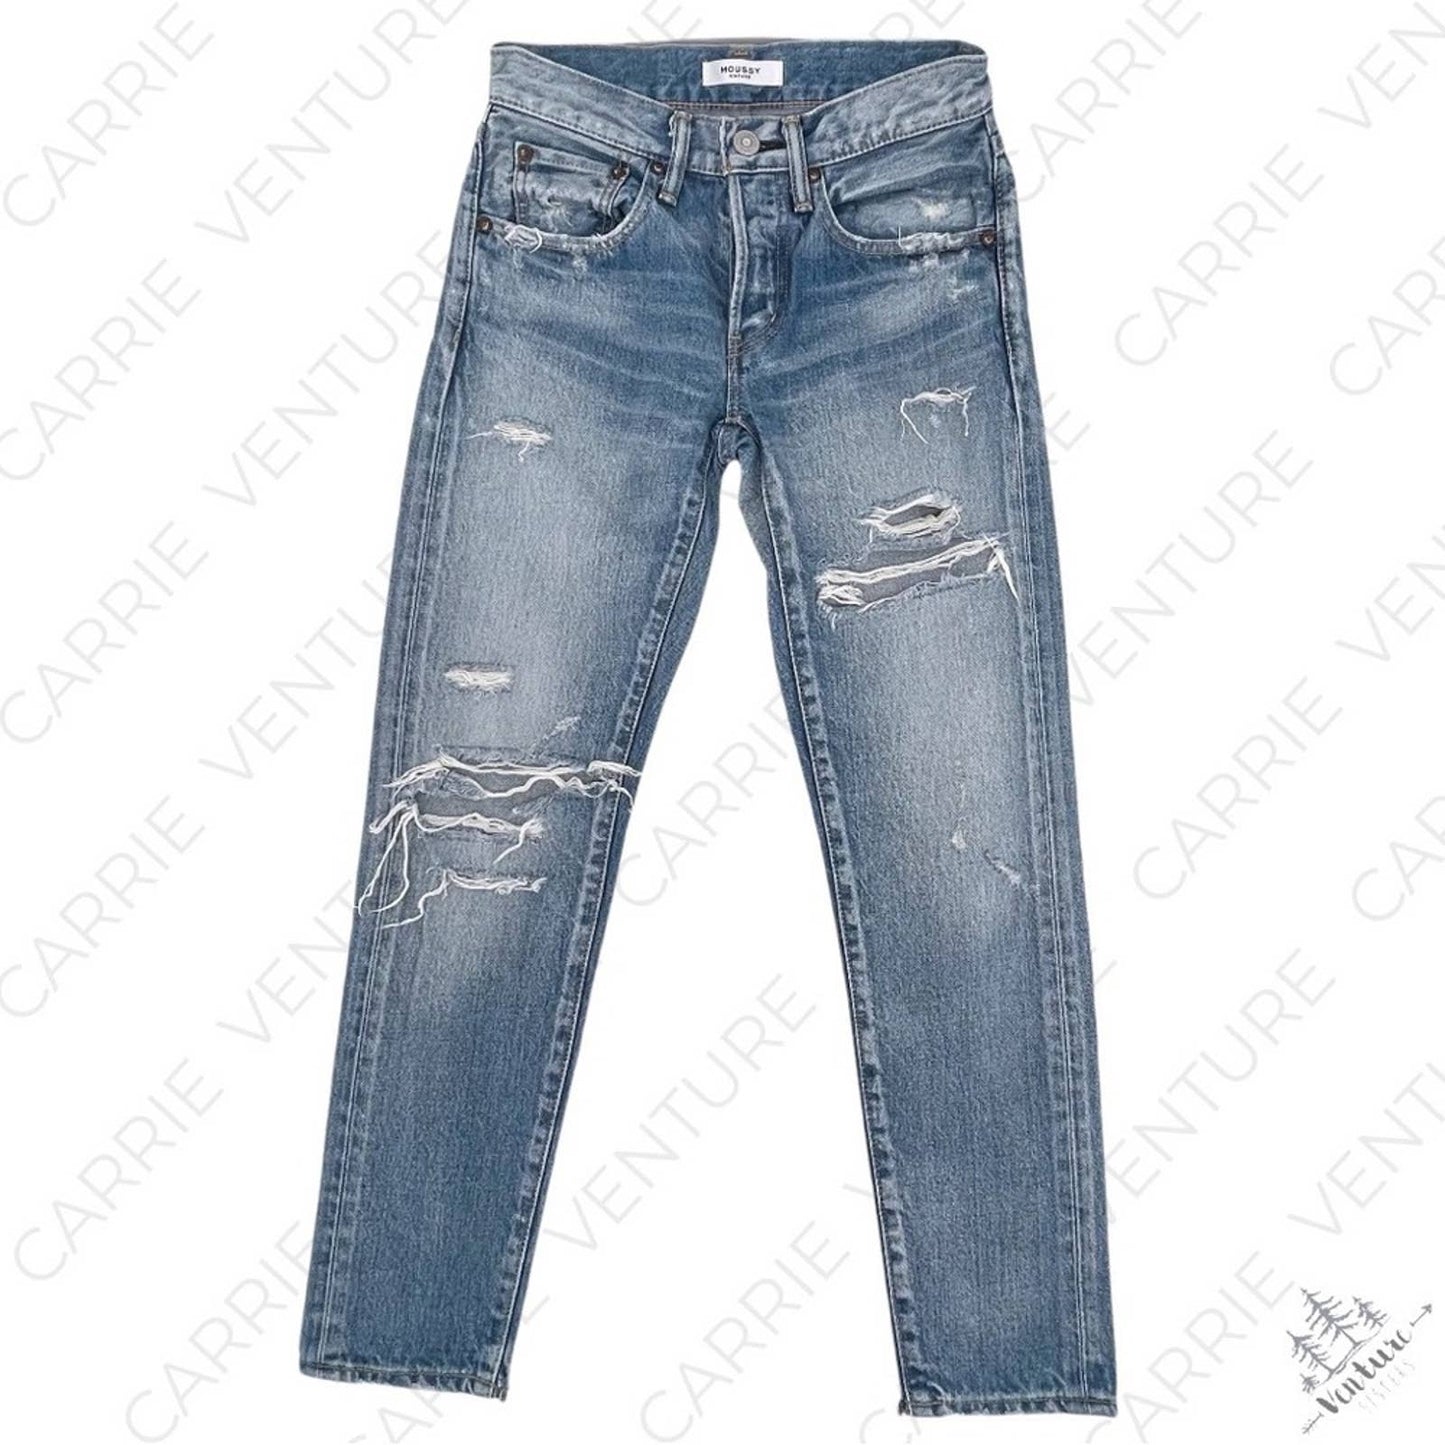 Moussy Vintage Bowie Tapered Straight Leg Light Wash Distressed Blue Jeans Style 025DSC11-1010 Size 24